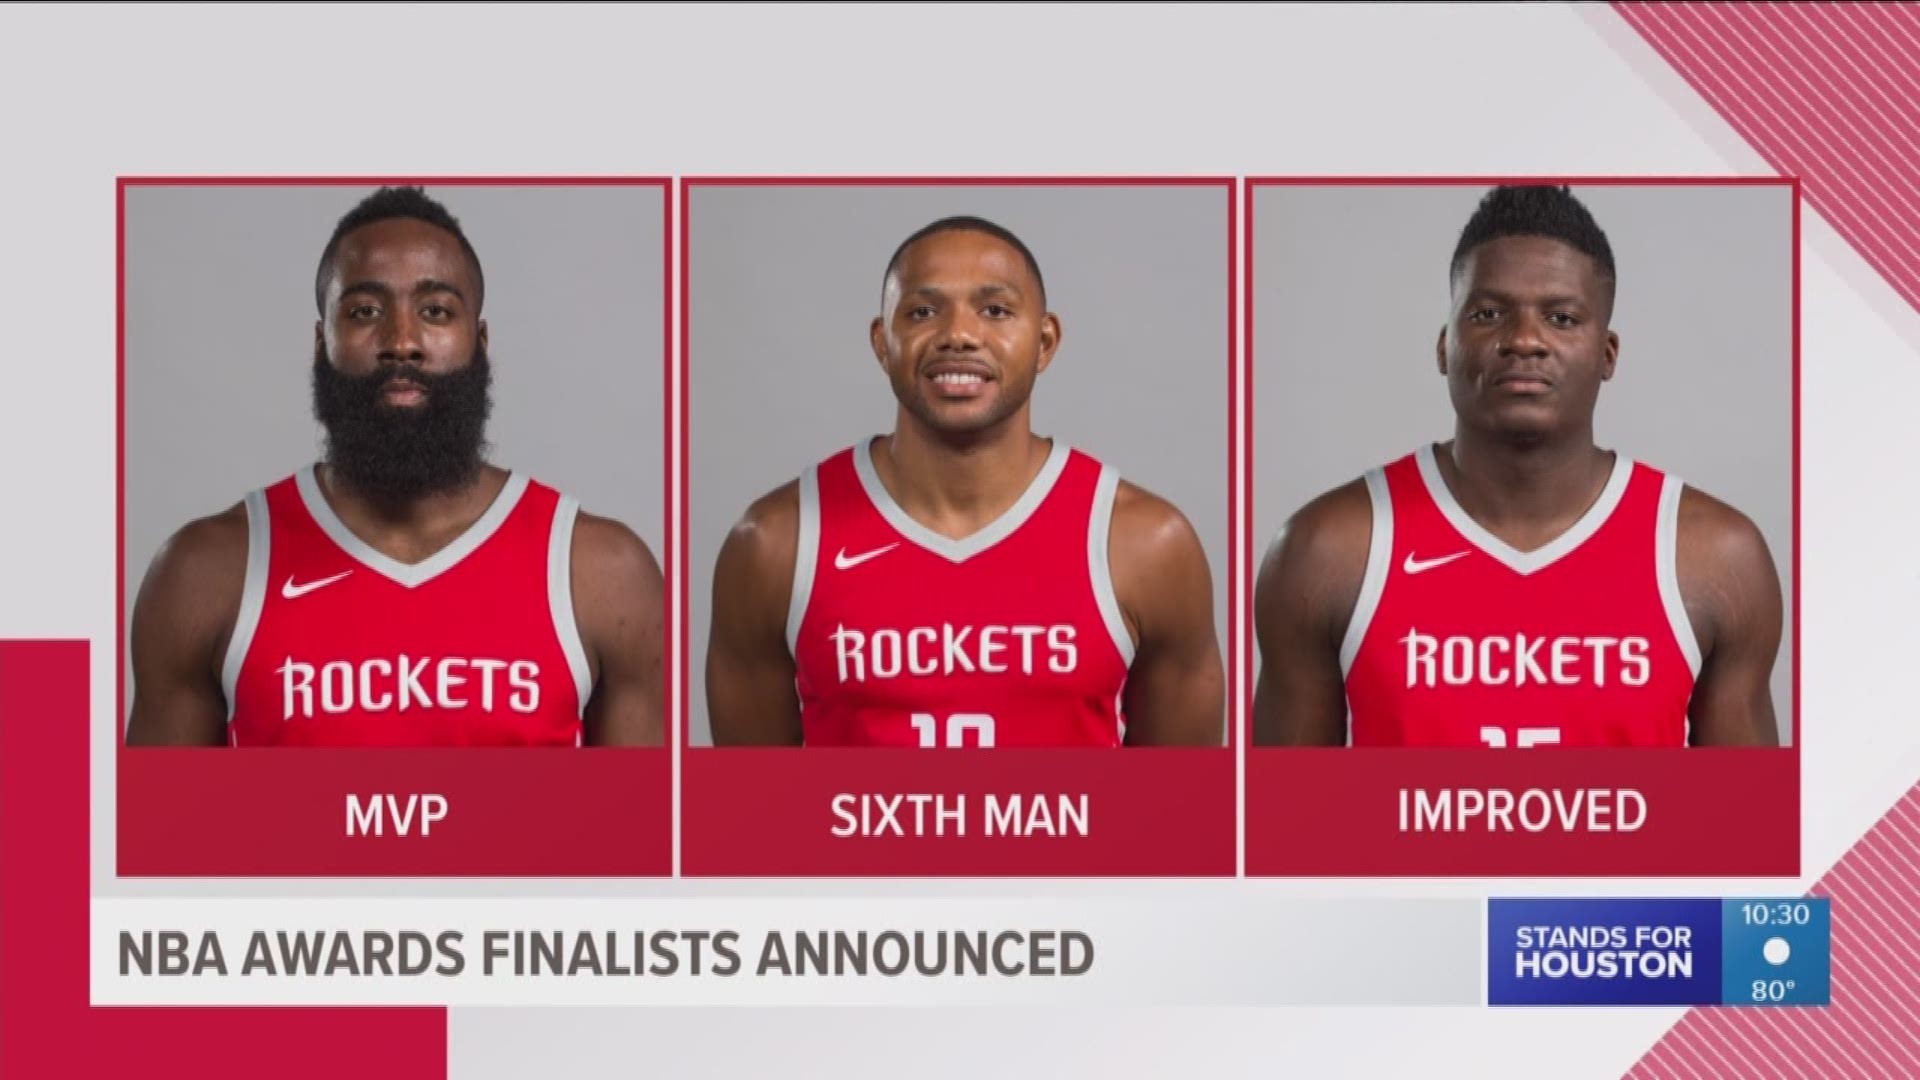 The Rockets' James Harden, Eric Gordon and Clint Capela were all named finalists for NBA MVP, Sixth Man of the Year and Clint Capela, respectively.